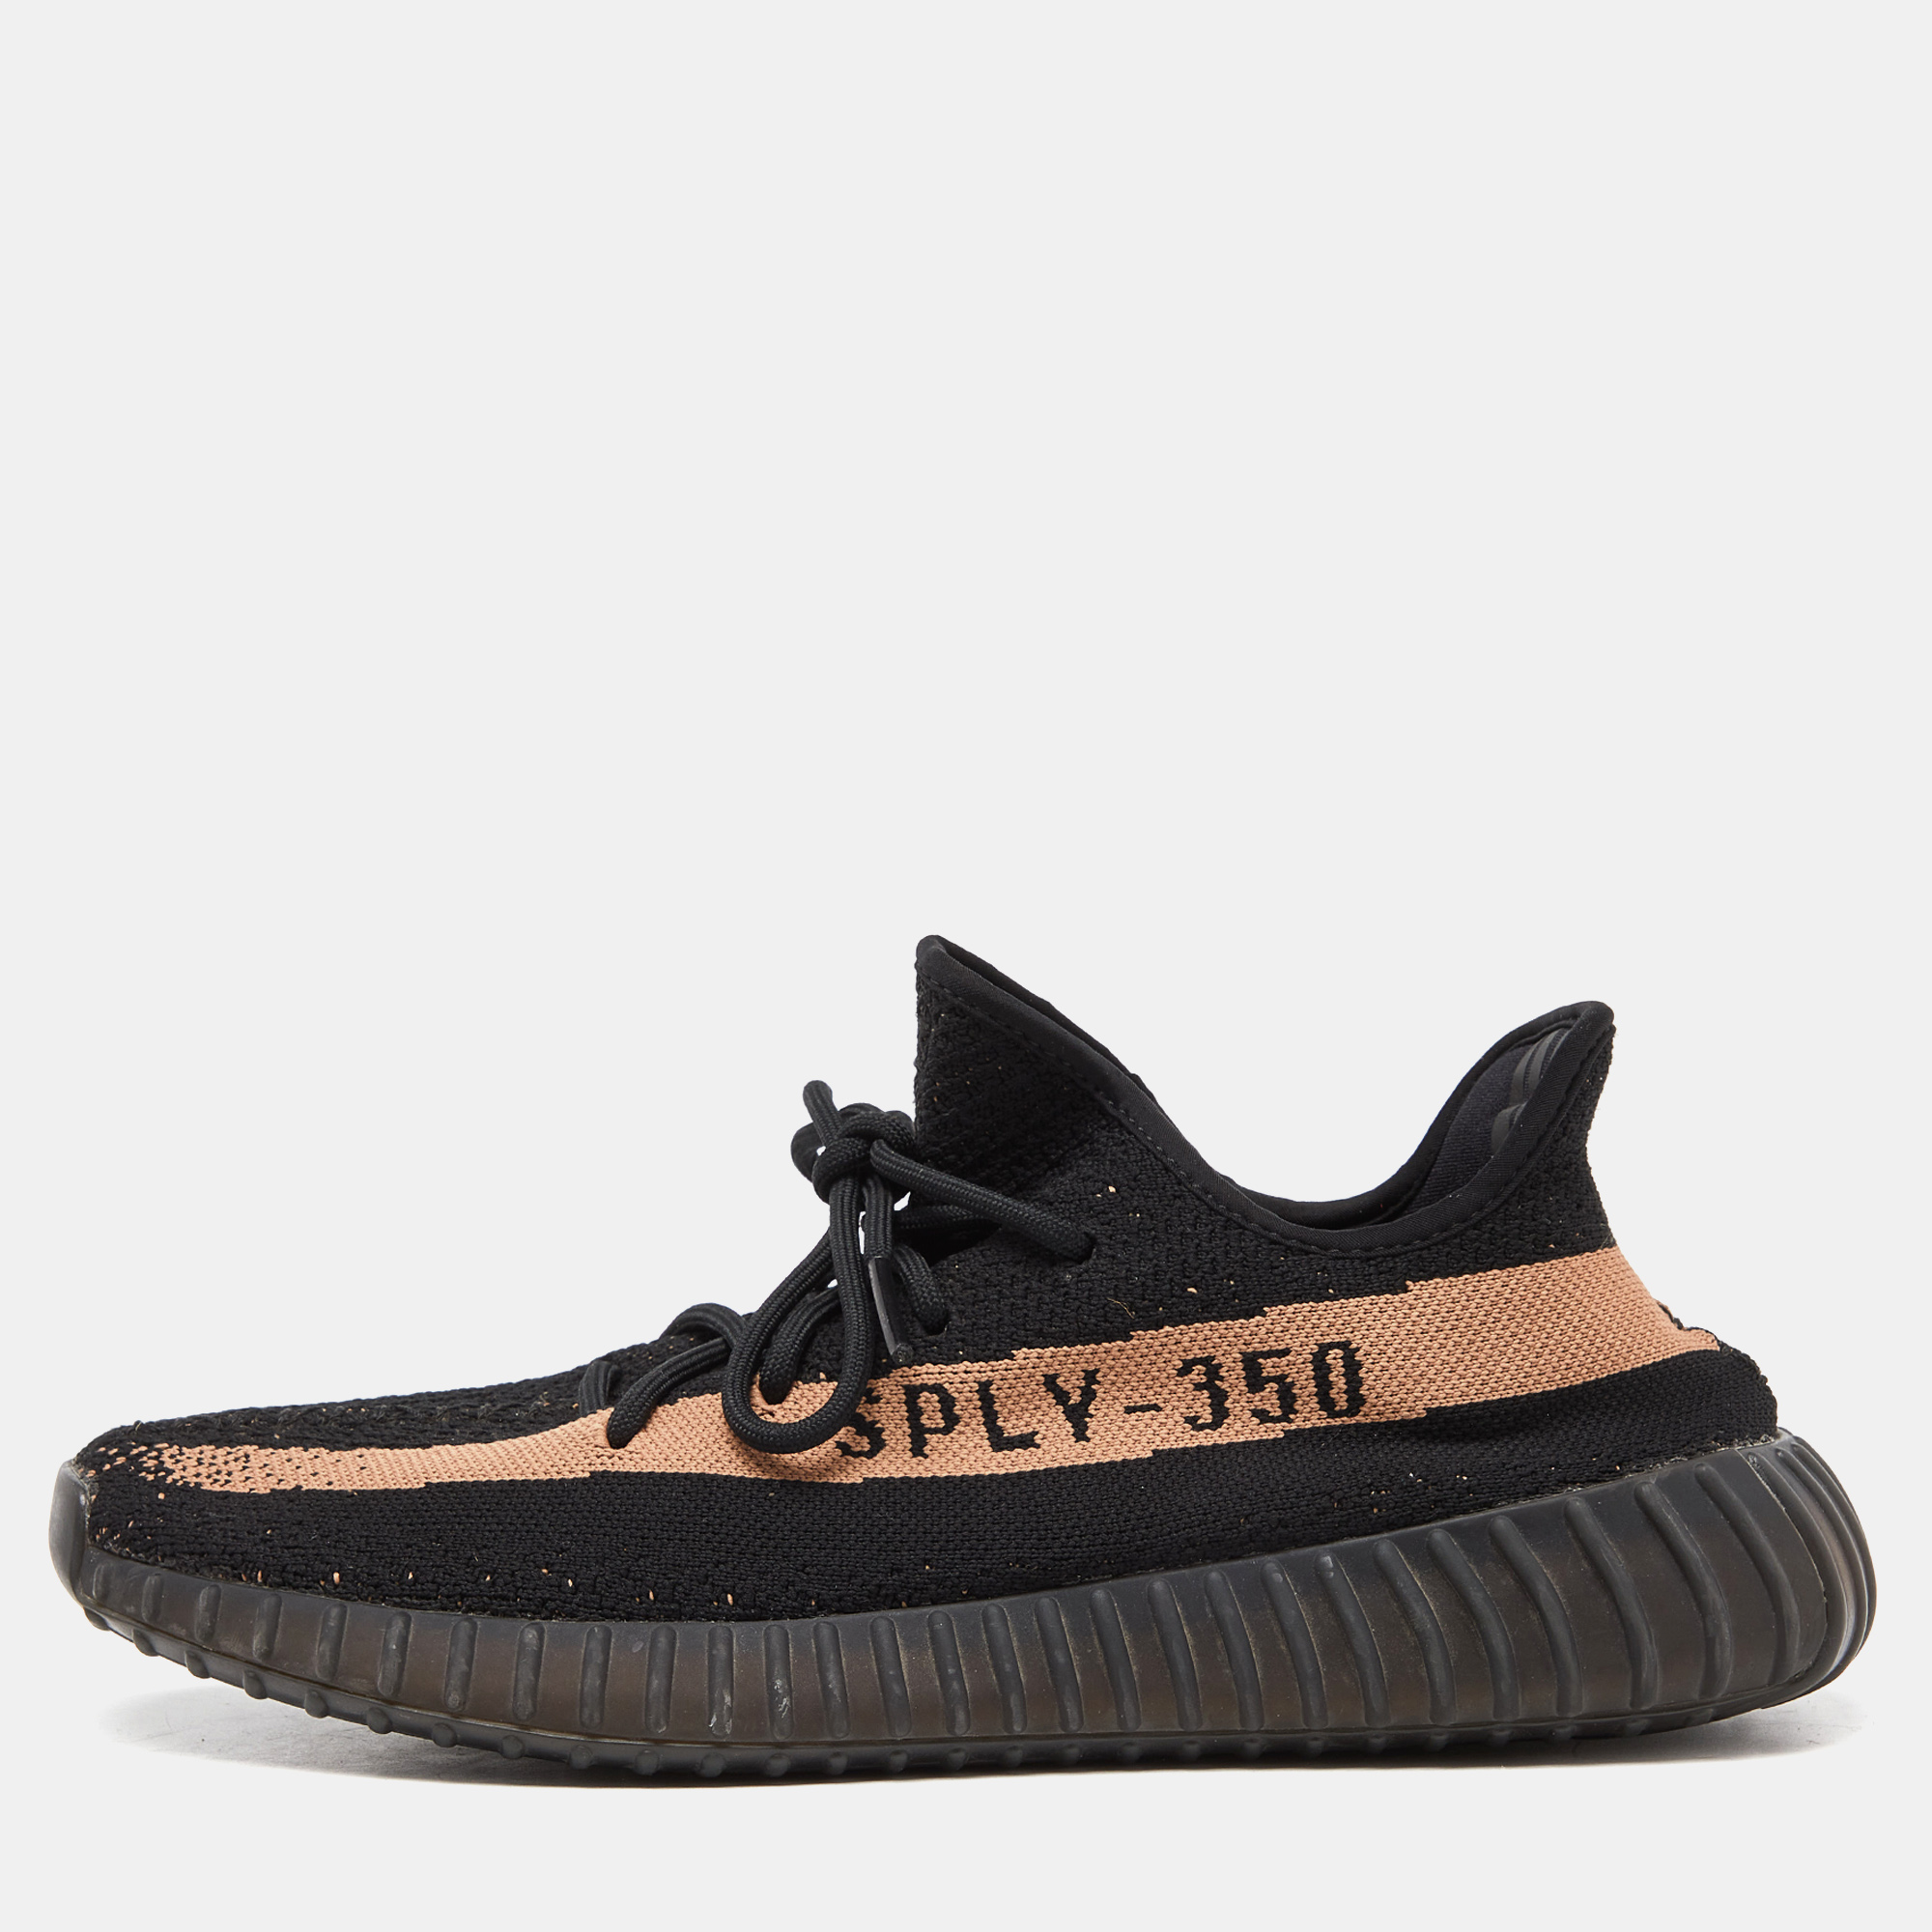 Pre-owned Yeezy X Adidas Black Knit Fabric Boost-350-v2-core-black Copper Trainers Size 44 1/3